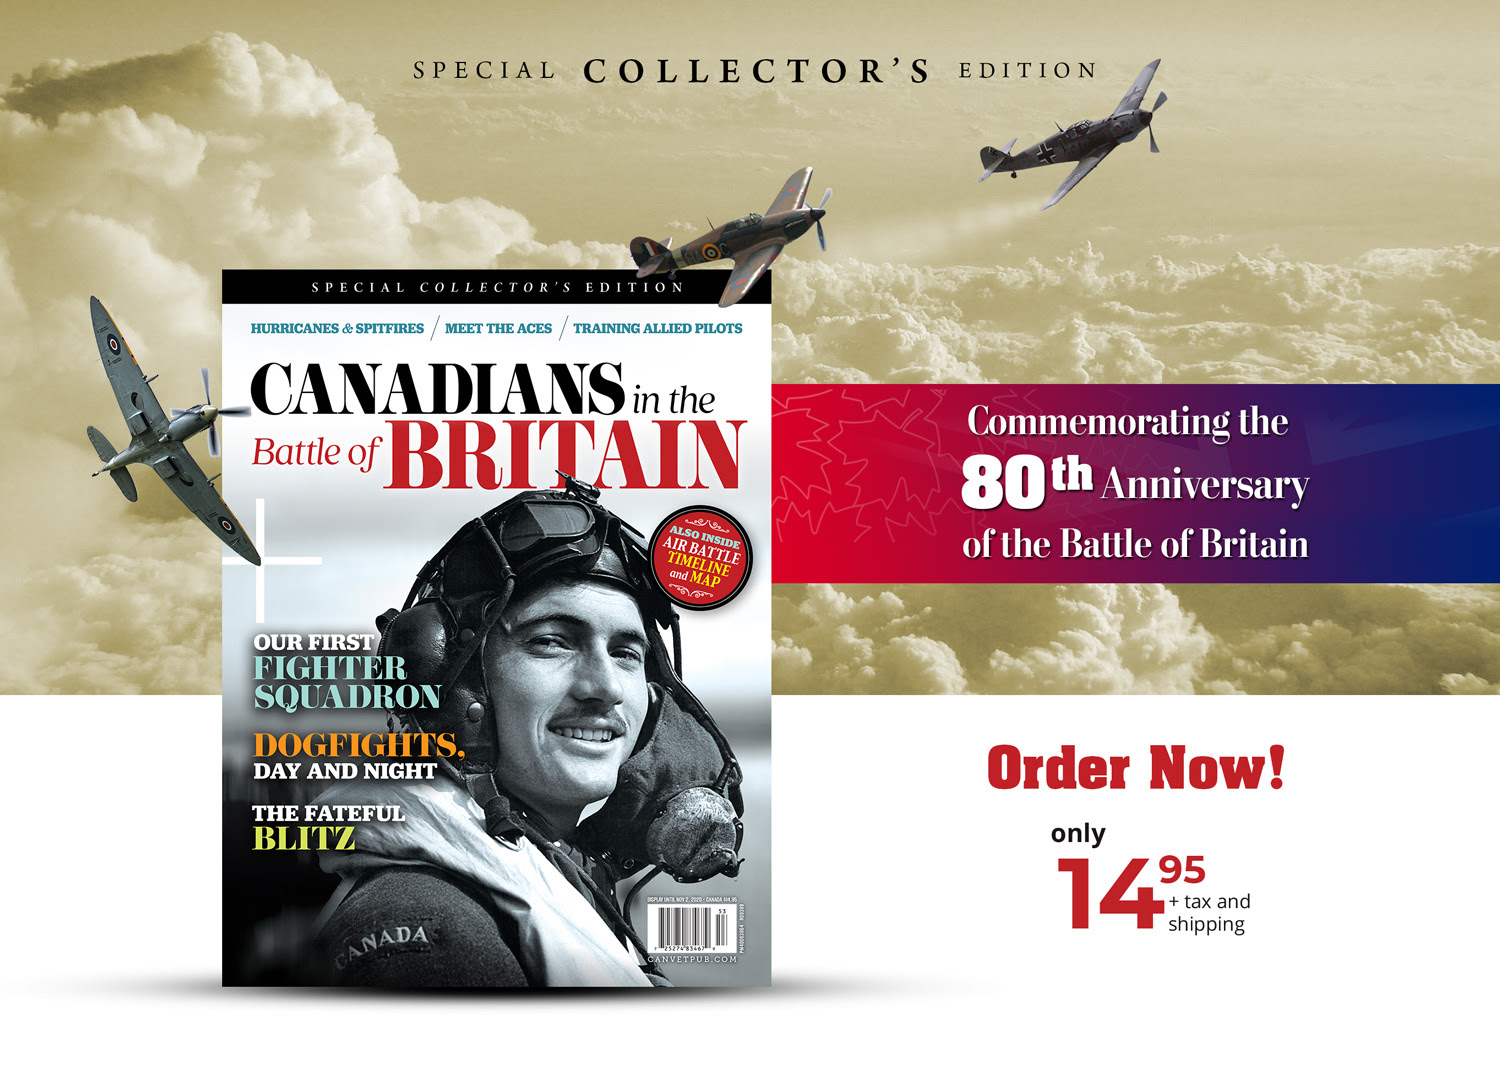 Canadians in the Battle of Britain